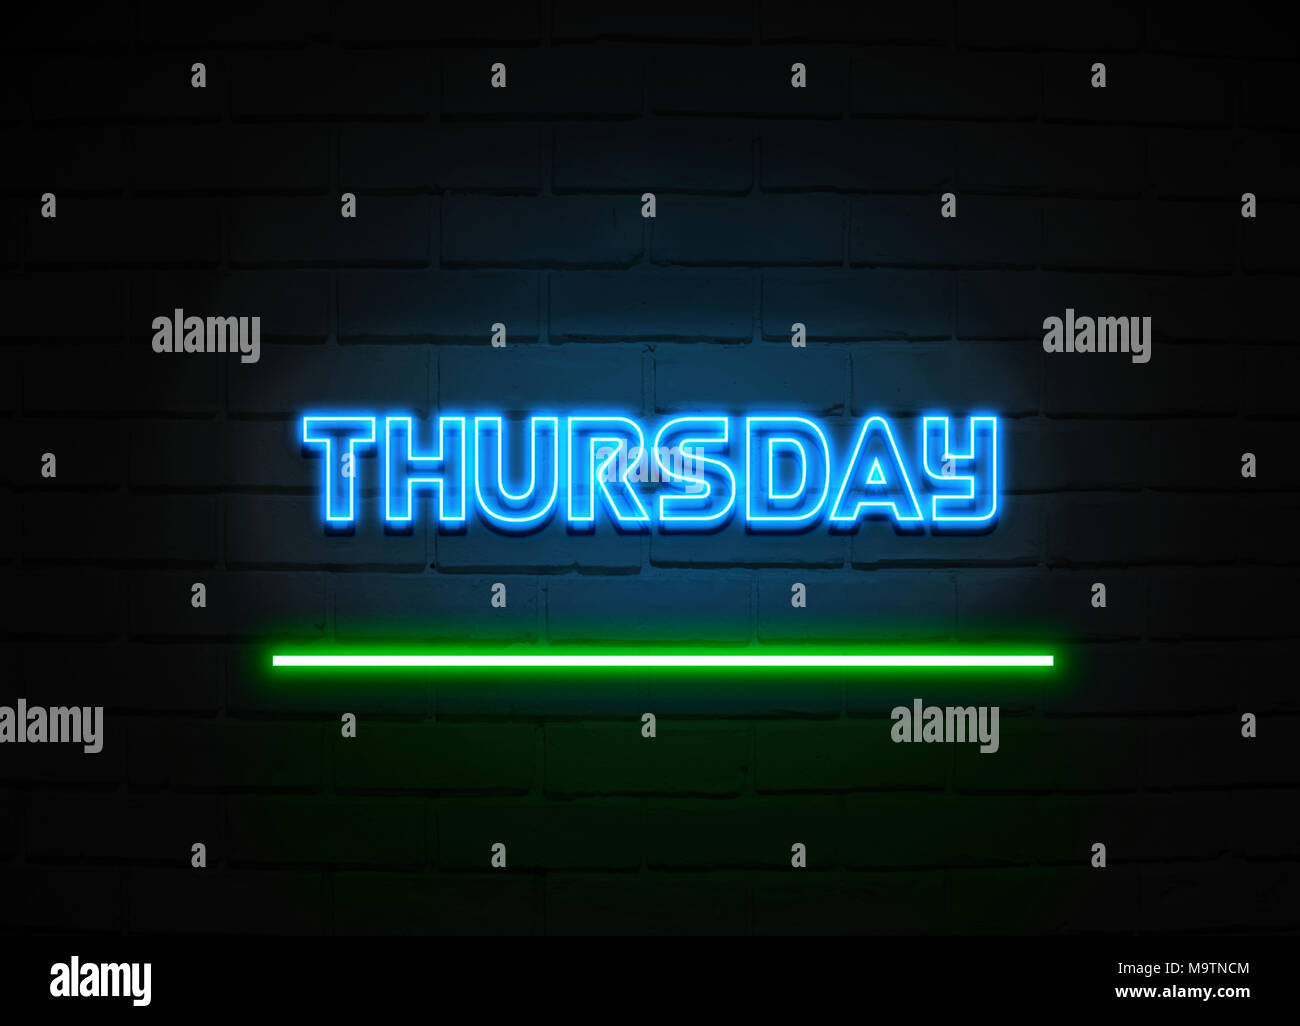 Thursday neon sign - Glowing Neon Sign on brickwall wall - 3D rendered royalty free stock illustration. Stock Photo